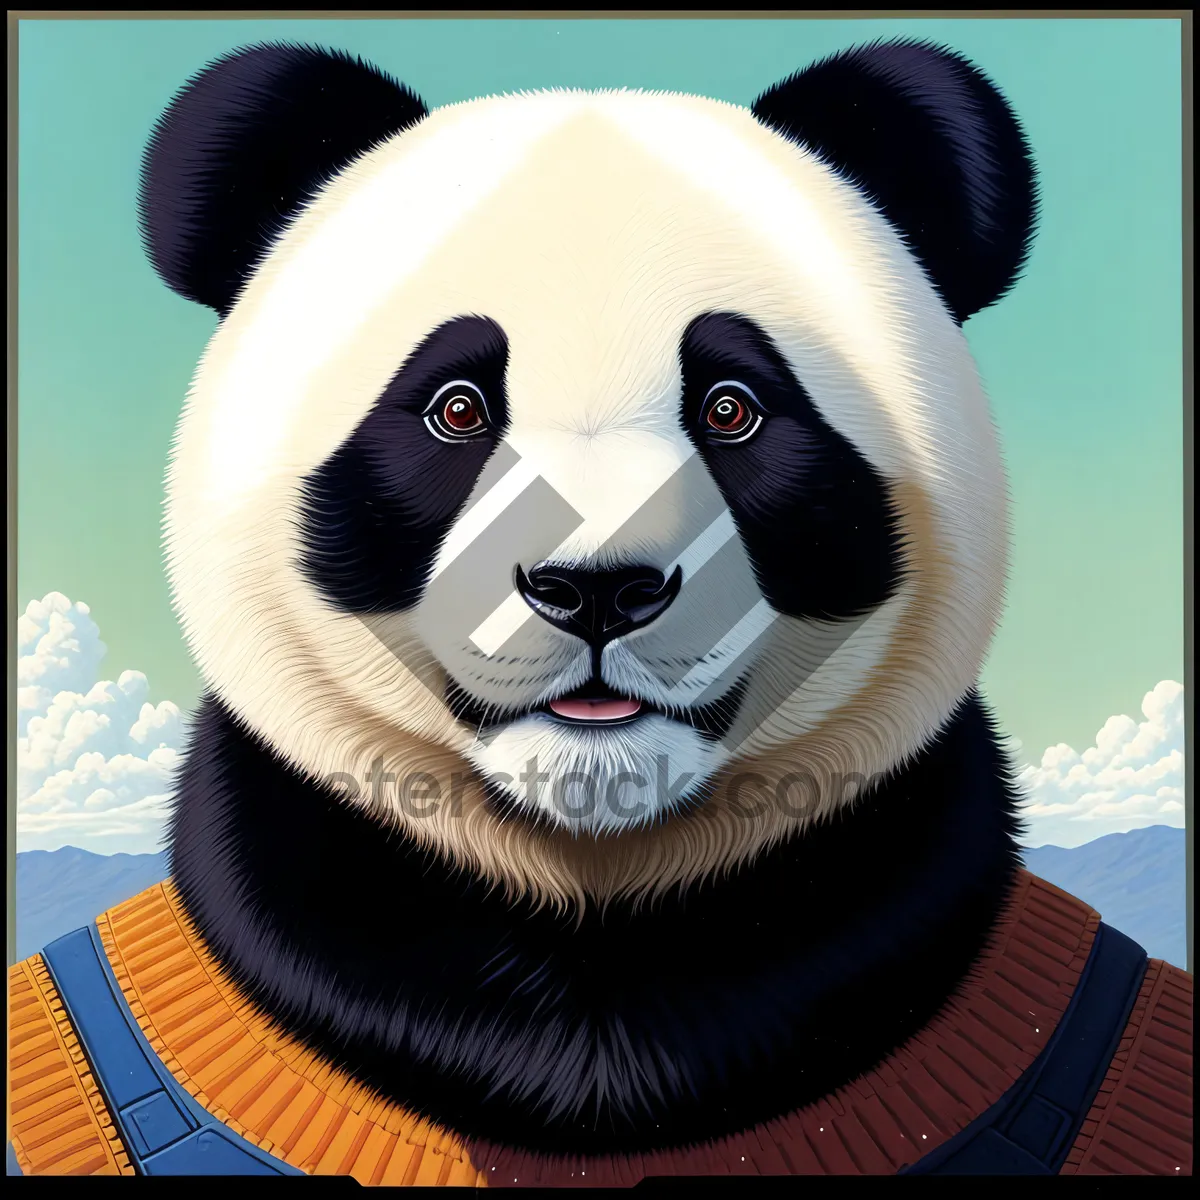 Picture of Cute Giant Panda Mascot with Fluffy Fur - Animal Portrait